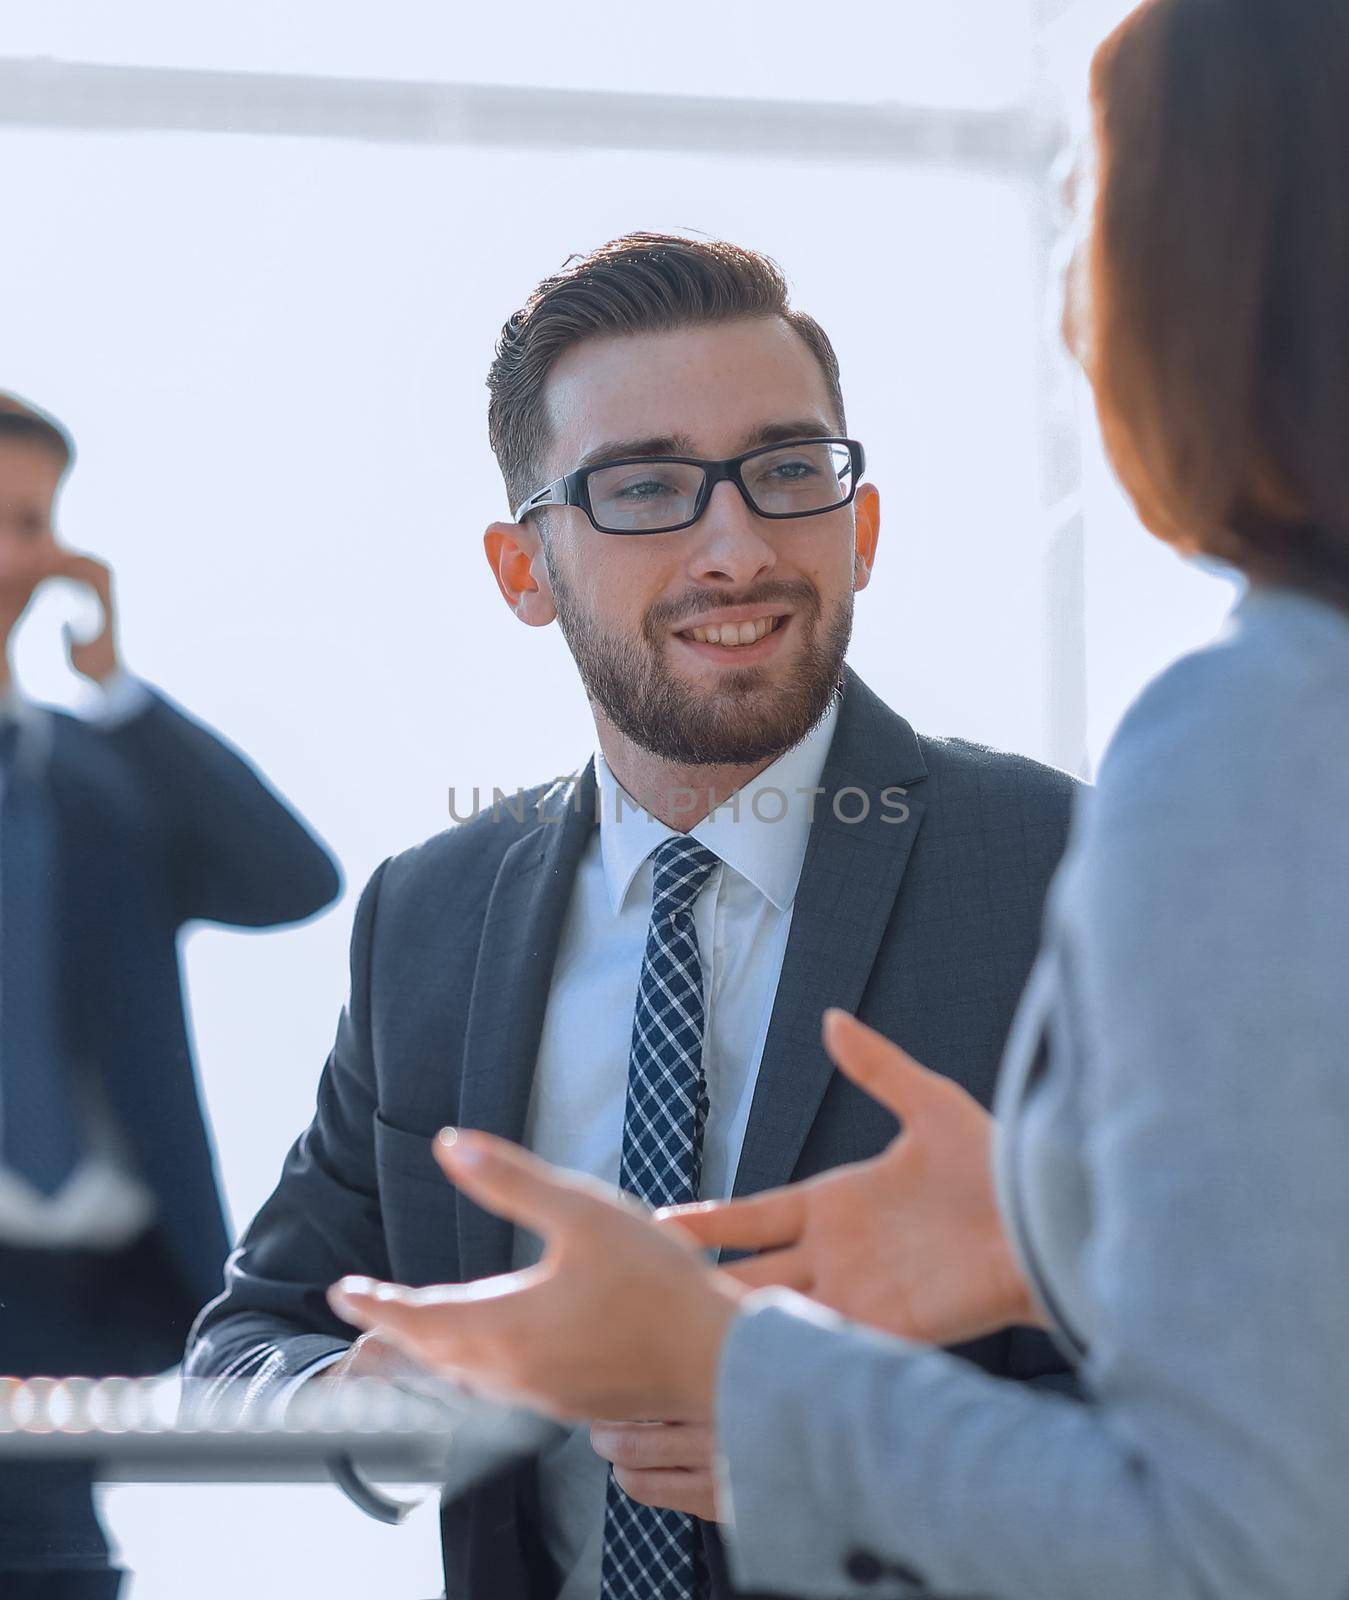 Confident man talking to his interviewer during a job interview.business concept